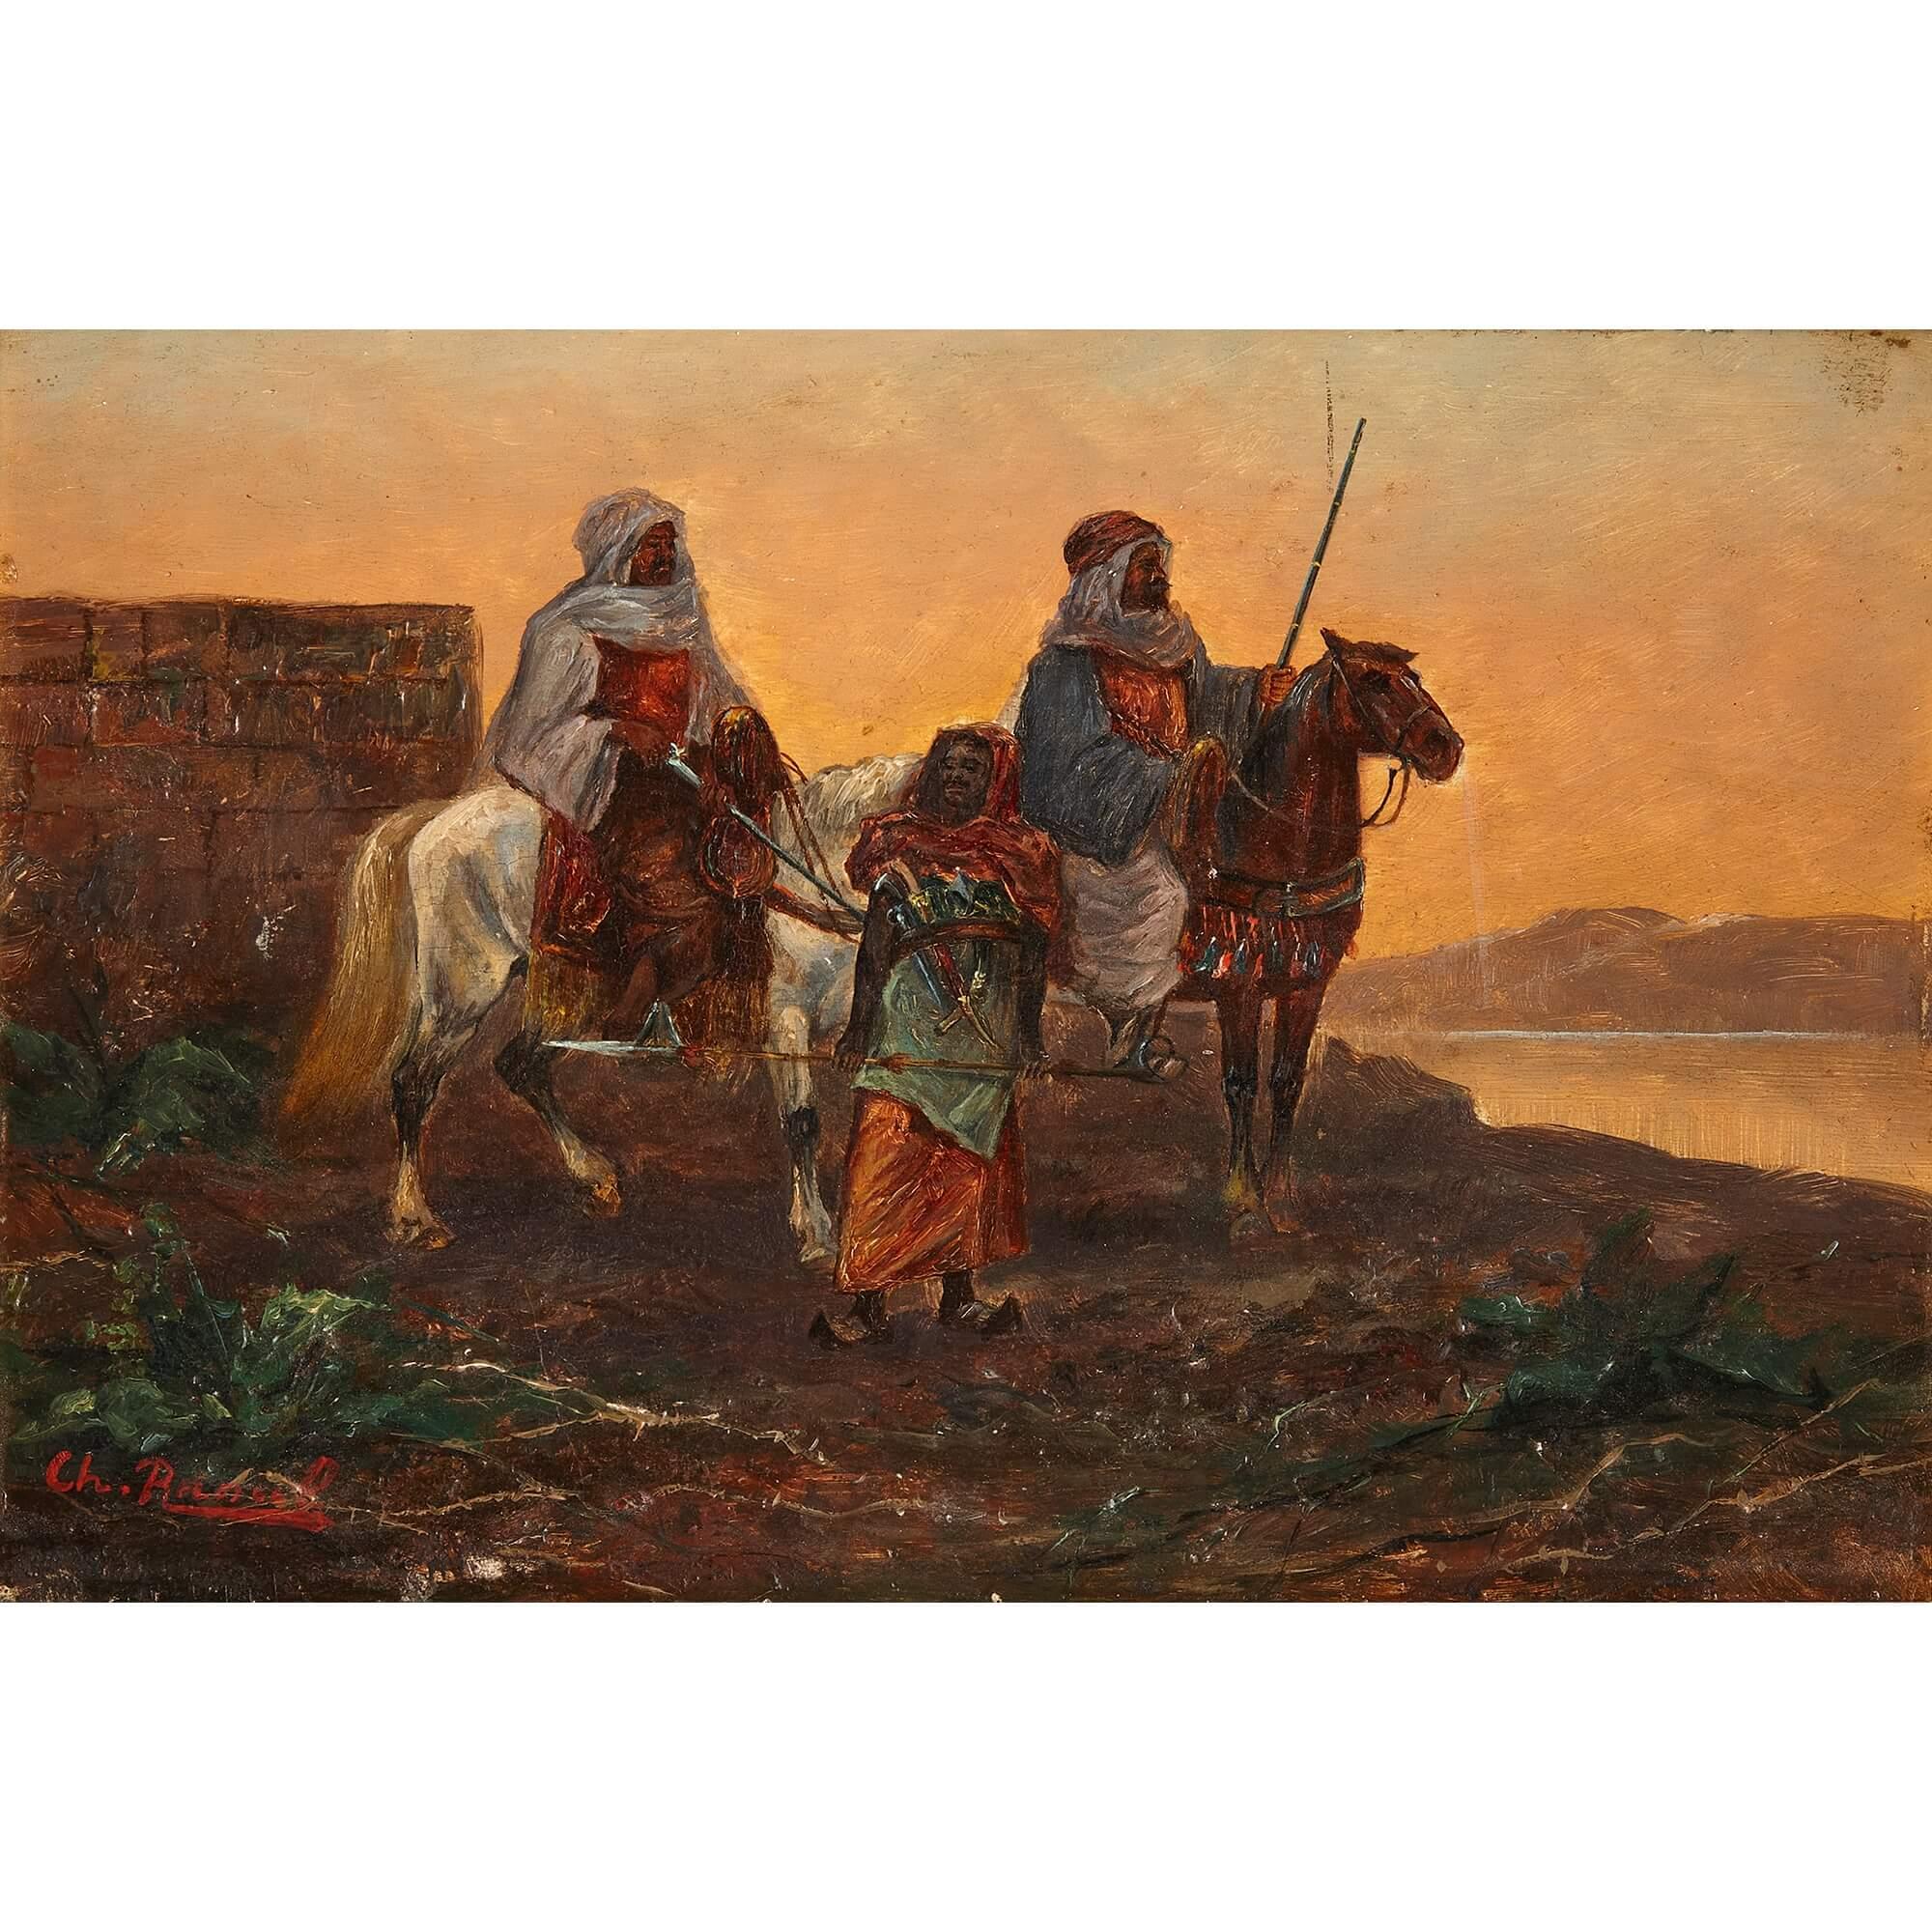 Orientalist oil painting with Equestrian subject
Continental, Early 20th century
Canvas size: Height 21cm, width 32cm
Framed size: Height 30cm, width 40cm, depth 3cm

Drawing upon a desirable Orientalist subject, this cinematic oil on panel painting